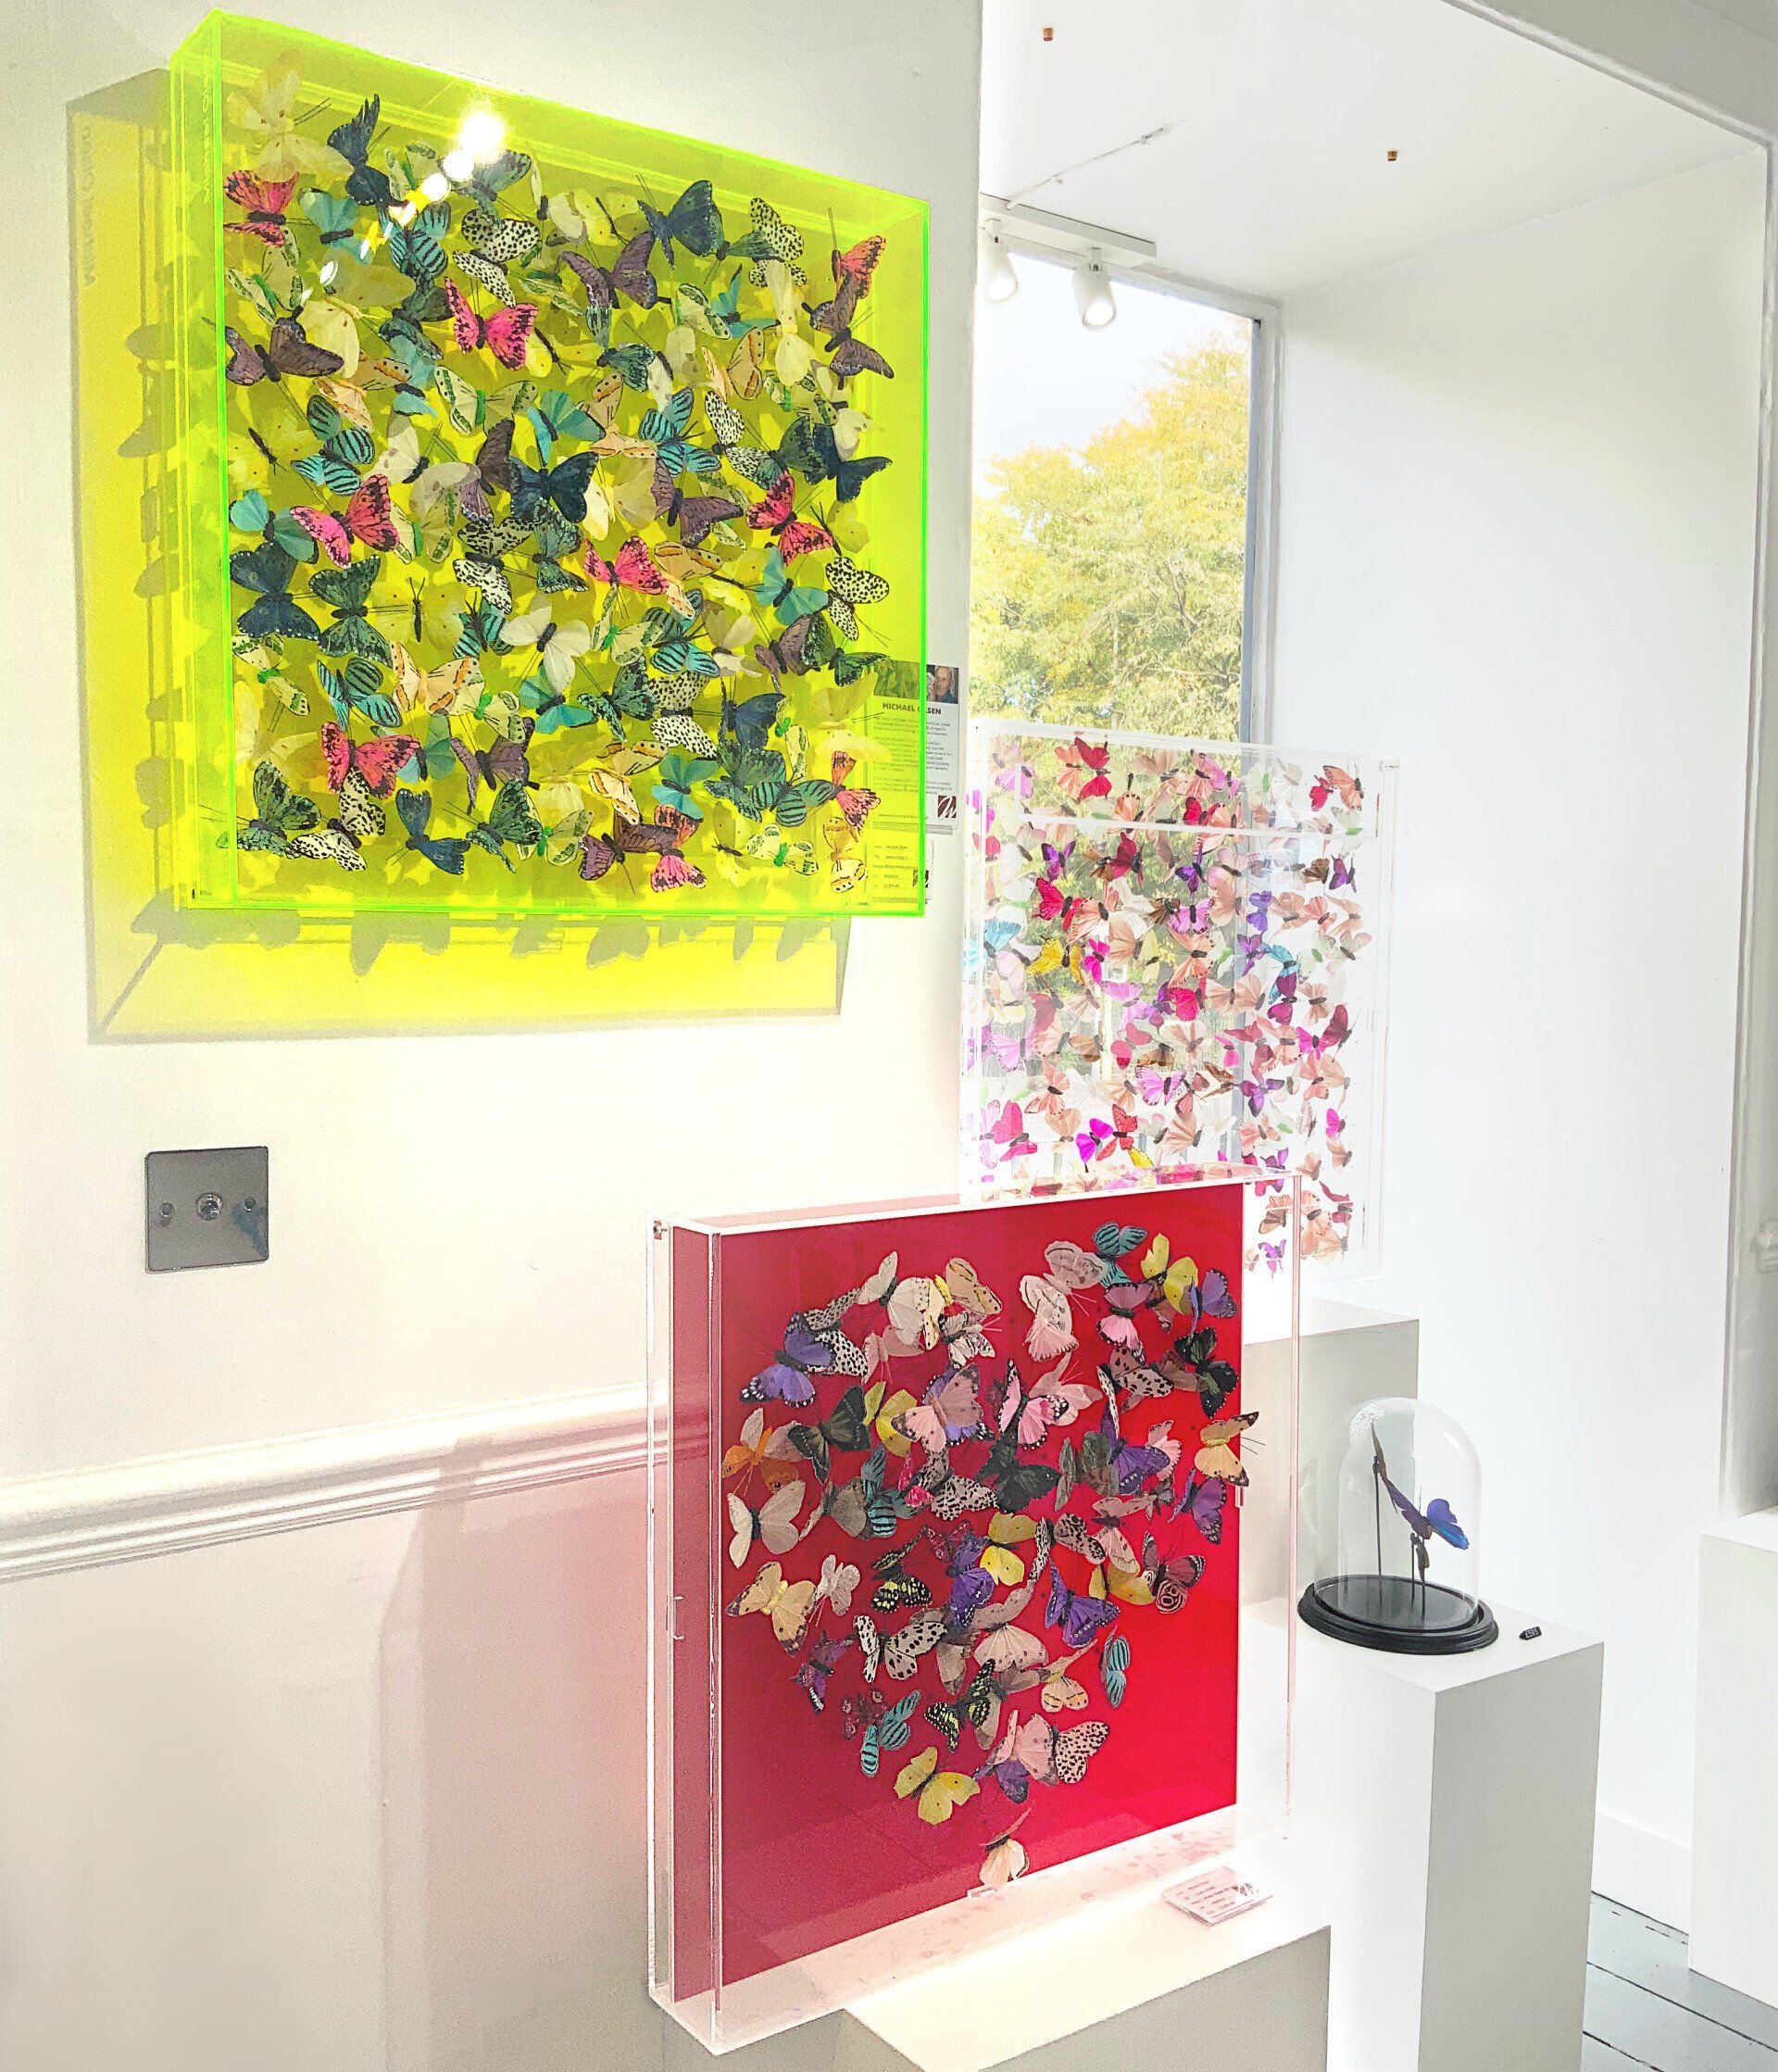 Butterfly artwork in acrylic boxes by Michael Olsen available to buy at Watson Gallery Edinburgh